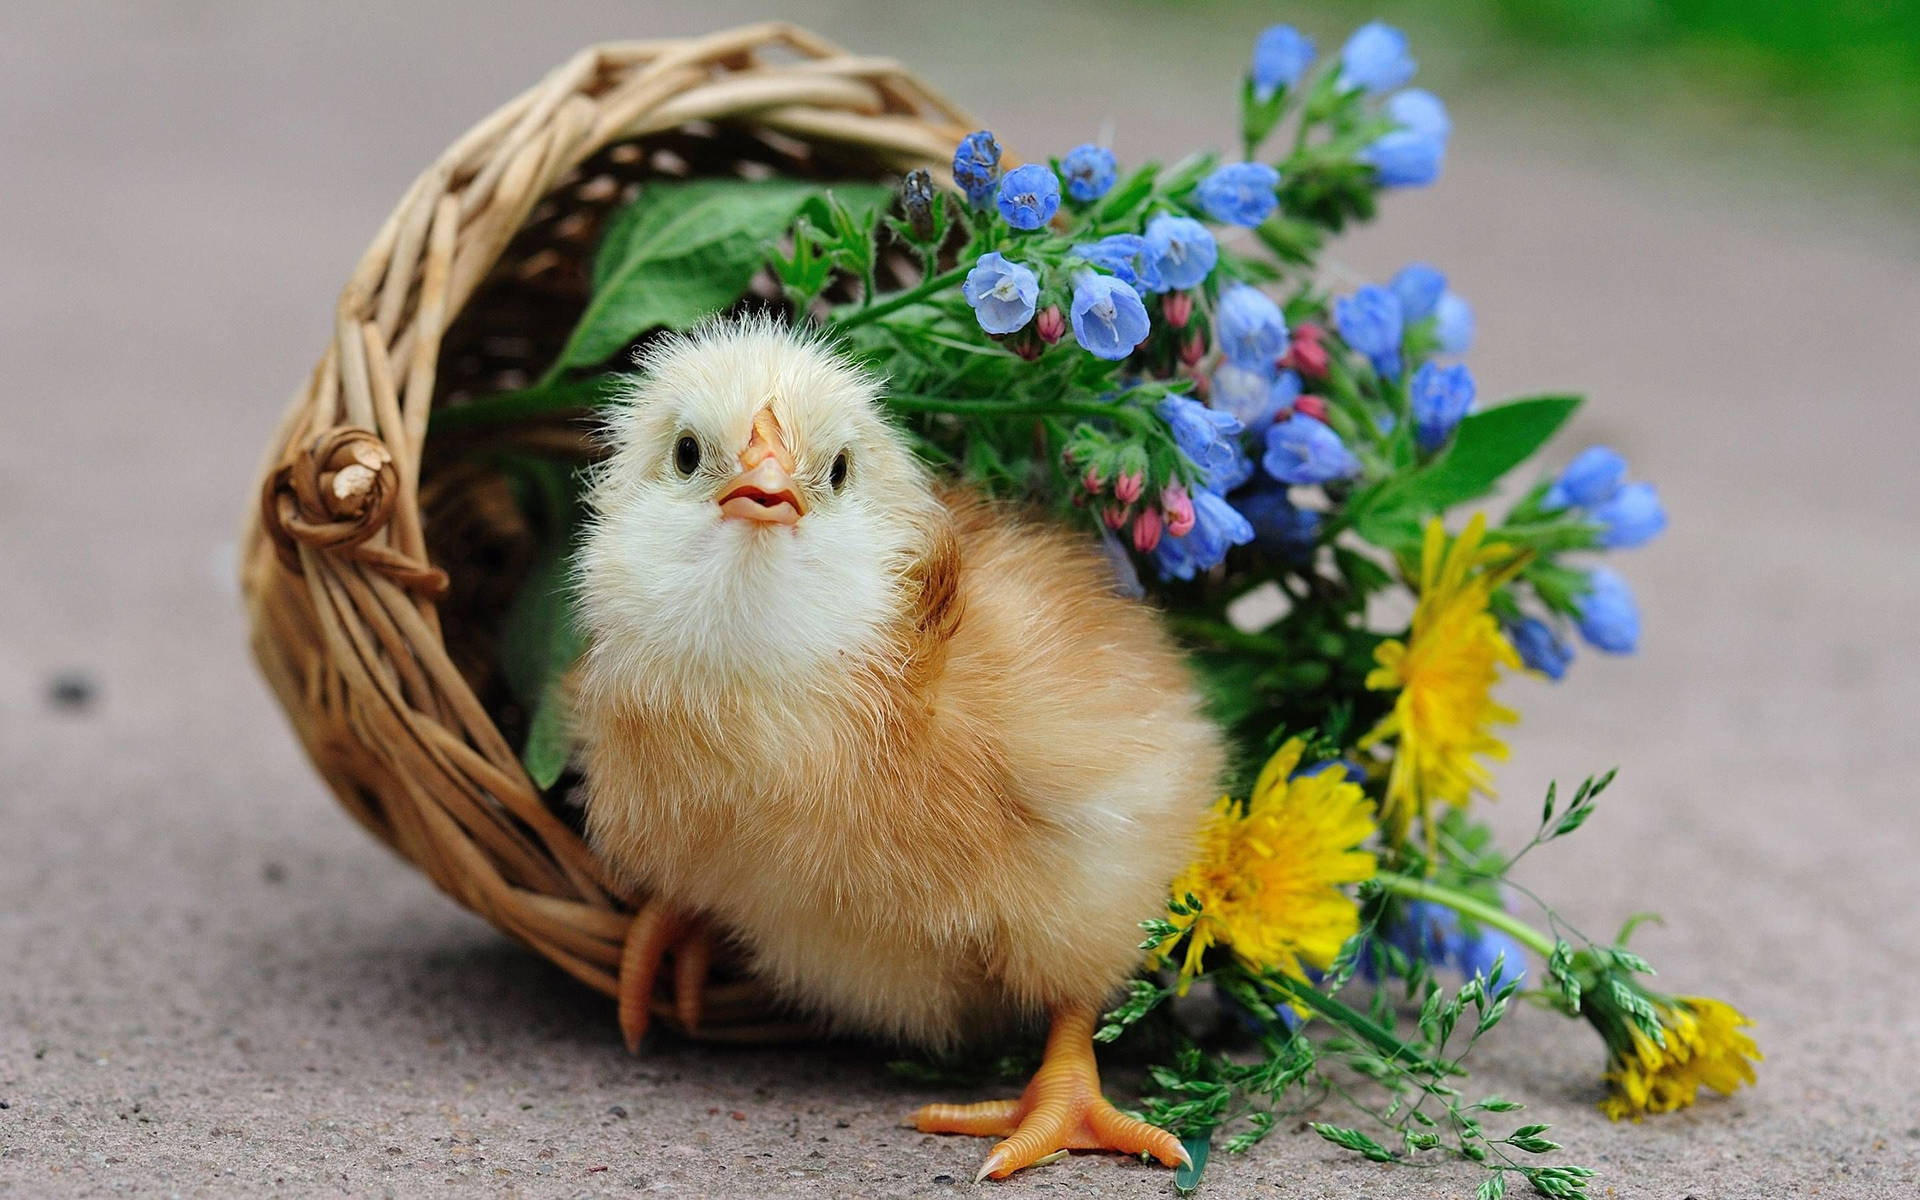 A Darling Little Chick Enjoying Some Springtime Weather